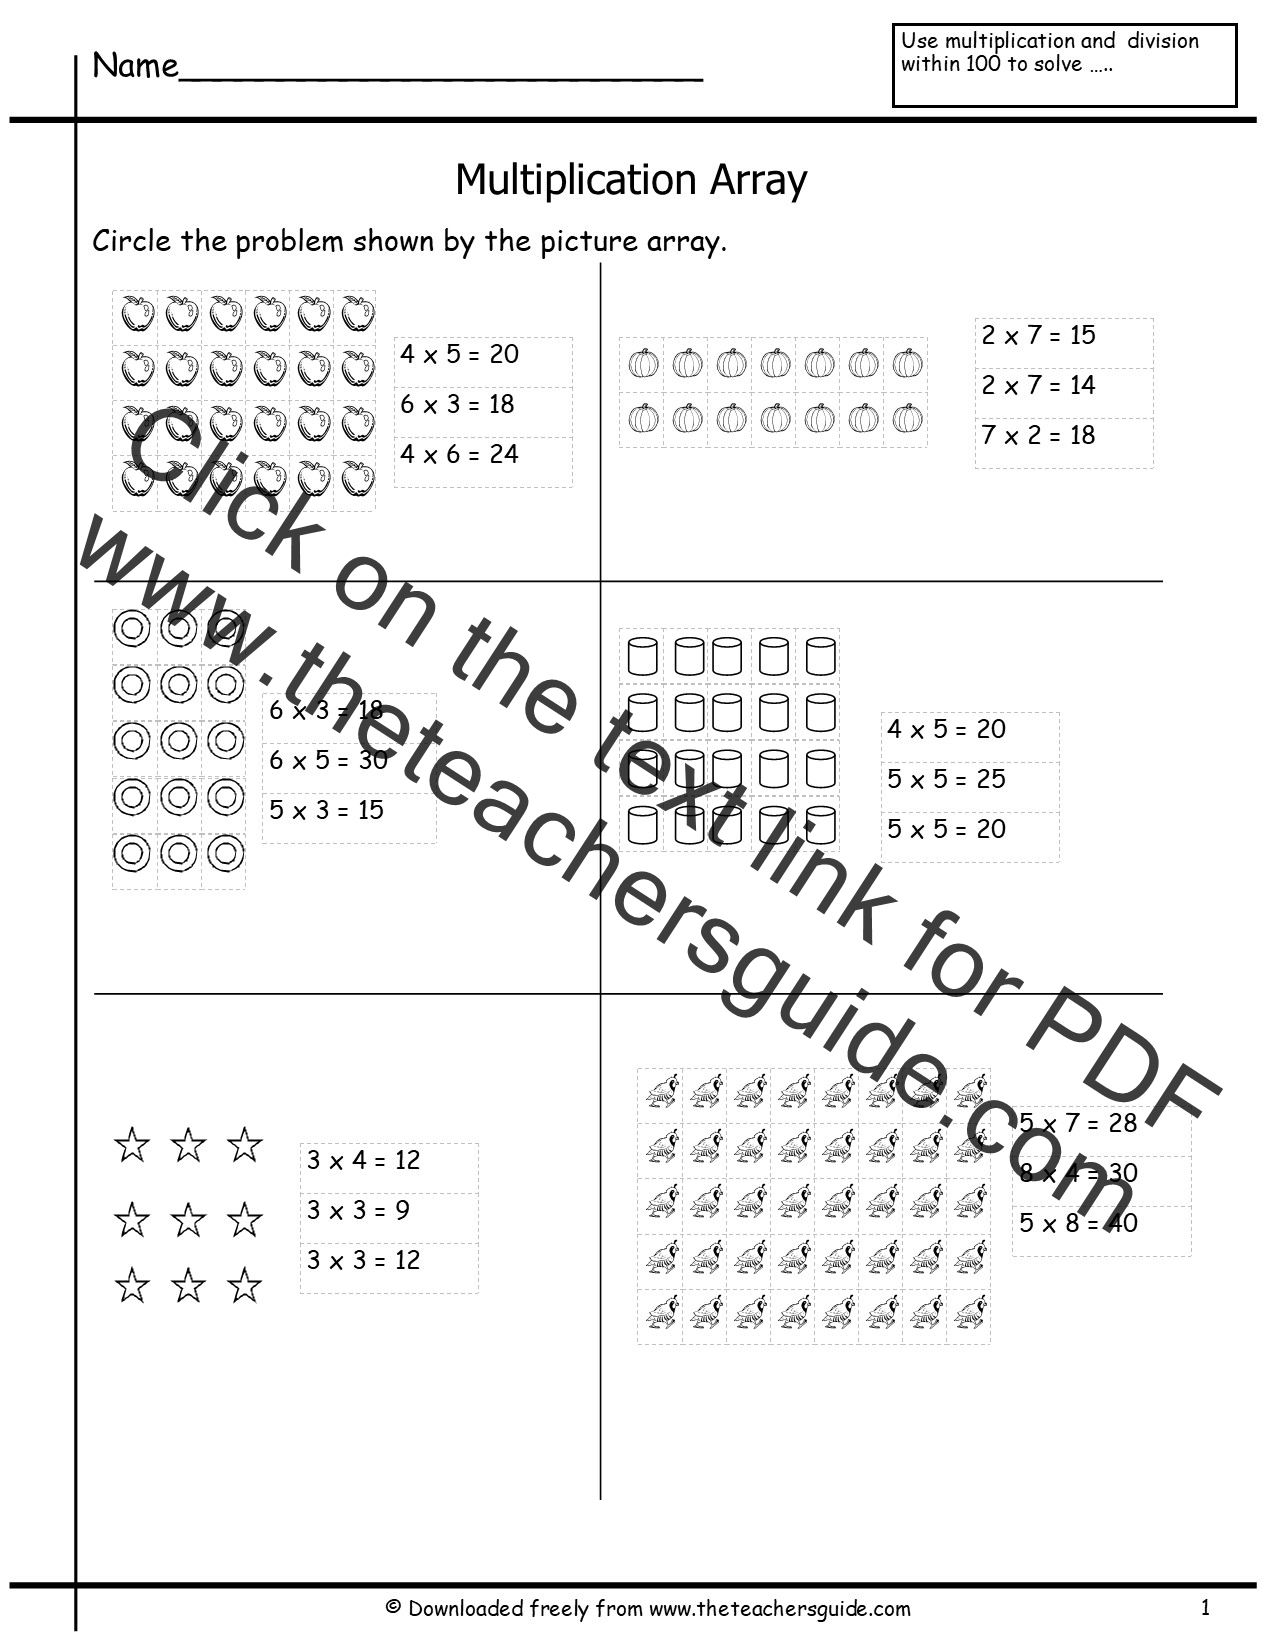 multiplication-array-worksheets-from-the-teacher-s-guide